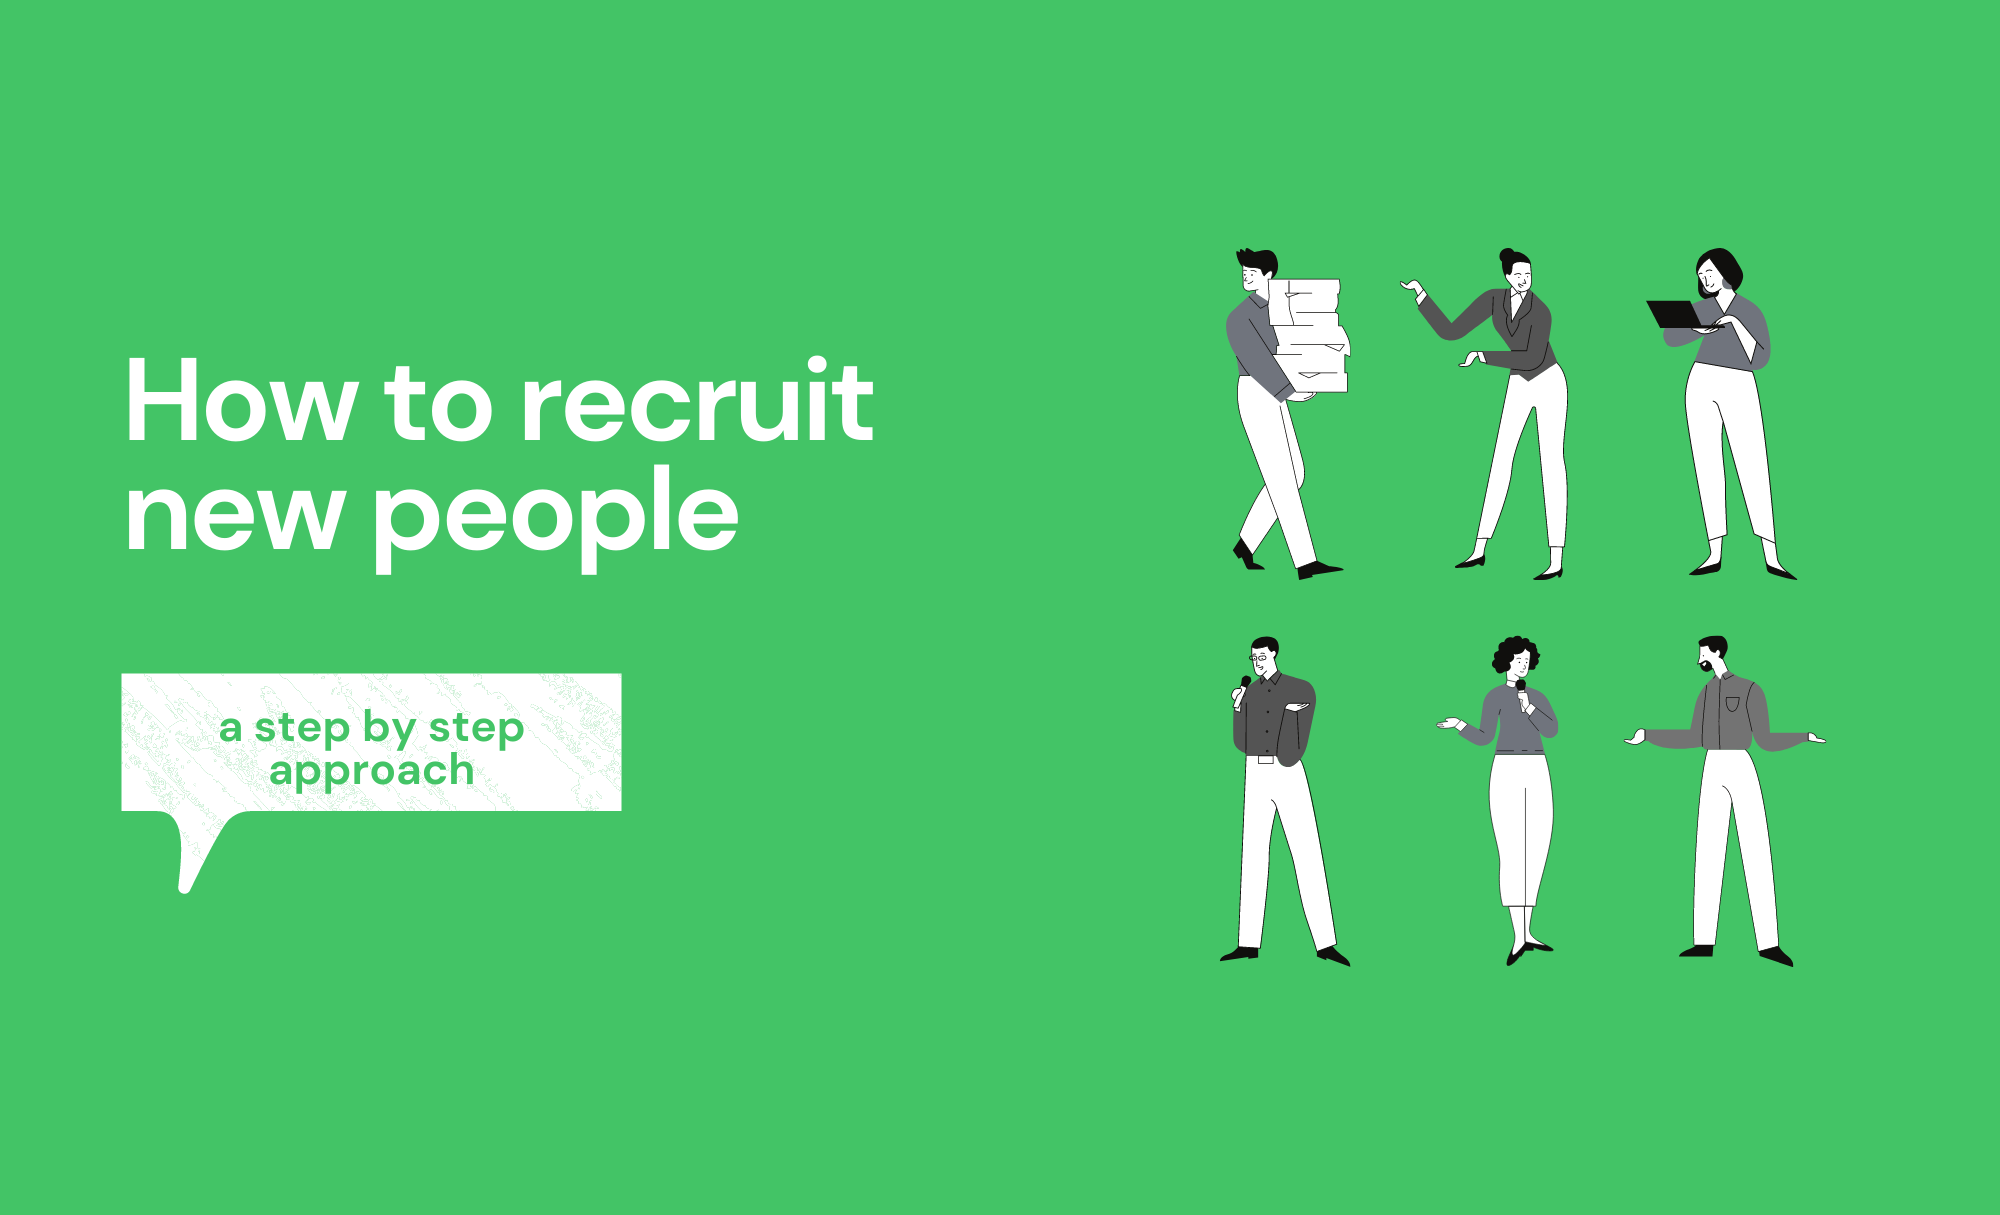 How to recruit new people